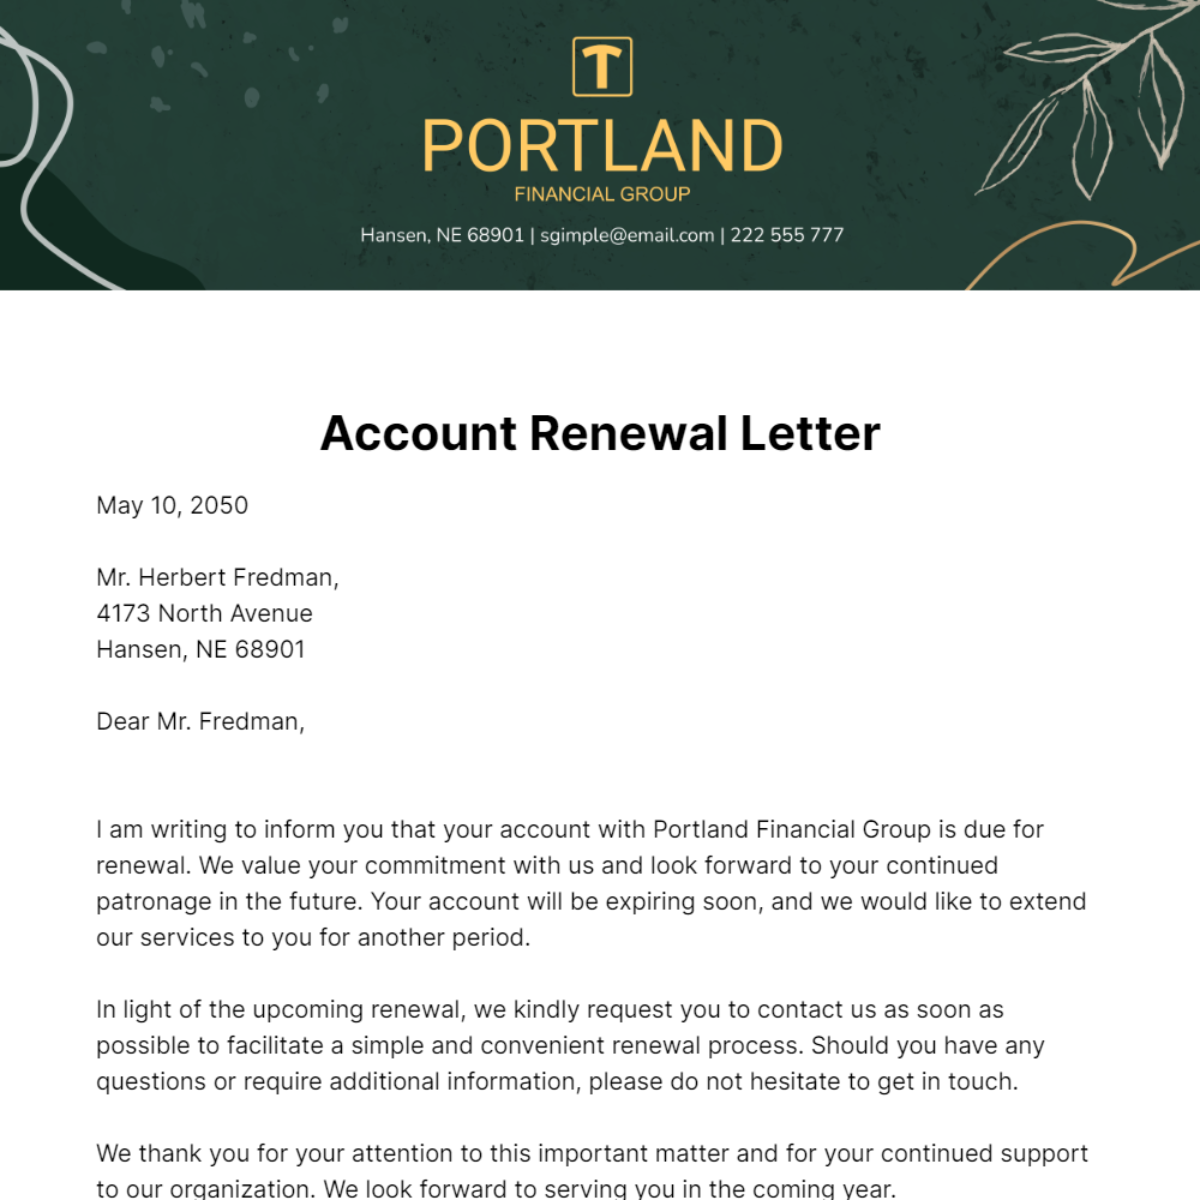 Account Renewal Letter   Template